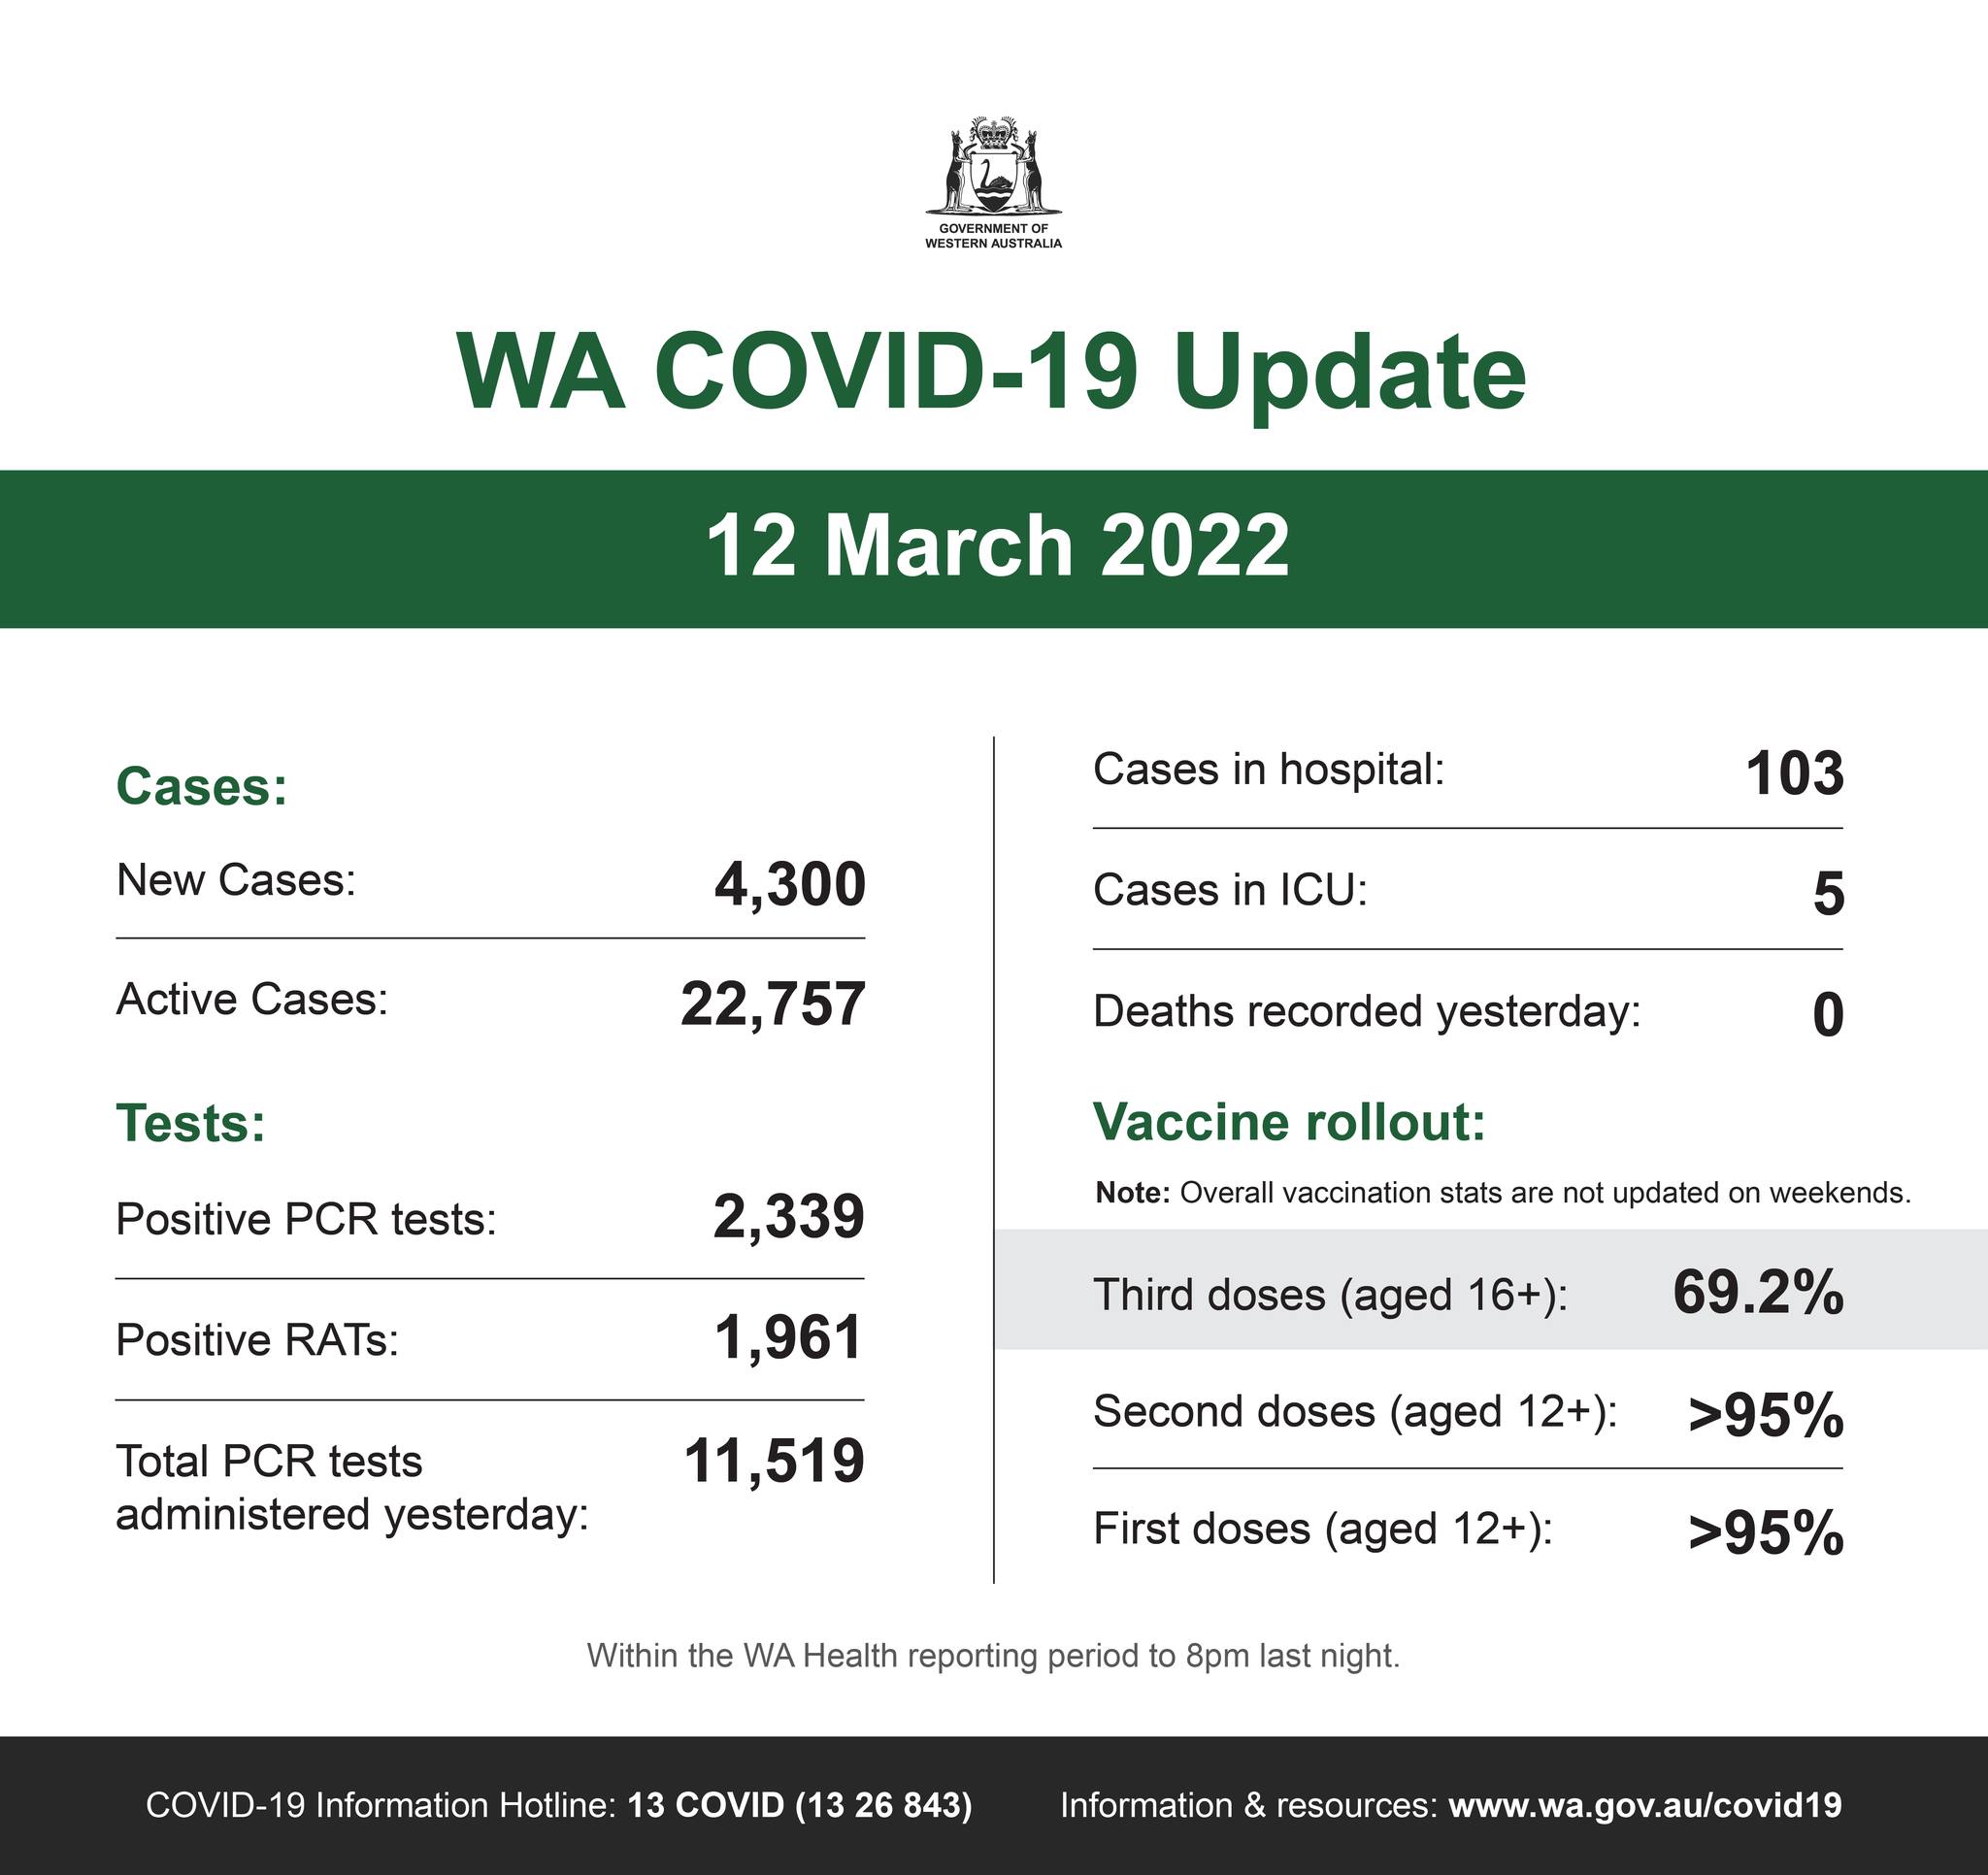 May be an image of text that says 'WESTERNAUSTRALIA WA COVID-19 Update 12 March 2022 Cases: New Cases: Cases in hospital: 4,300 Active Cases Cases in CU: 103 Tests: 22,757 5 Positive PCR tests: Deaths recorded yesterday: Vaccine rollout: Positive RATs: 2,339 Note: Overall vaccinatior stats are not updated on weekends. 1,961 Total PCR tests administered yesterday: Third doses (aged 16+): 11,519 69.2% Second doses (aged 12+): >95% First doses (aged 12+): Within the WA Health reporting period to 8pm last night. COVID-19 >95% Hotline: 13 COVID (13 26 843) Information esources www wa.'